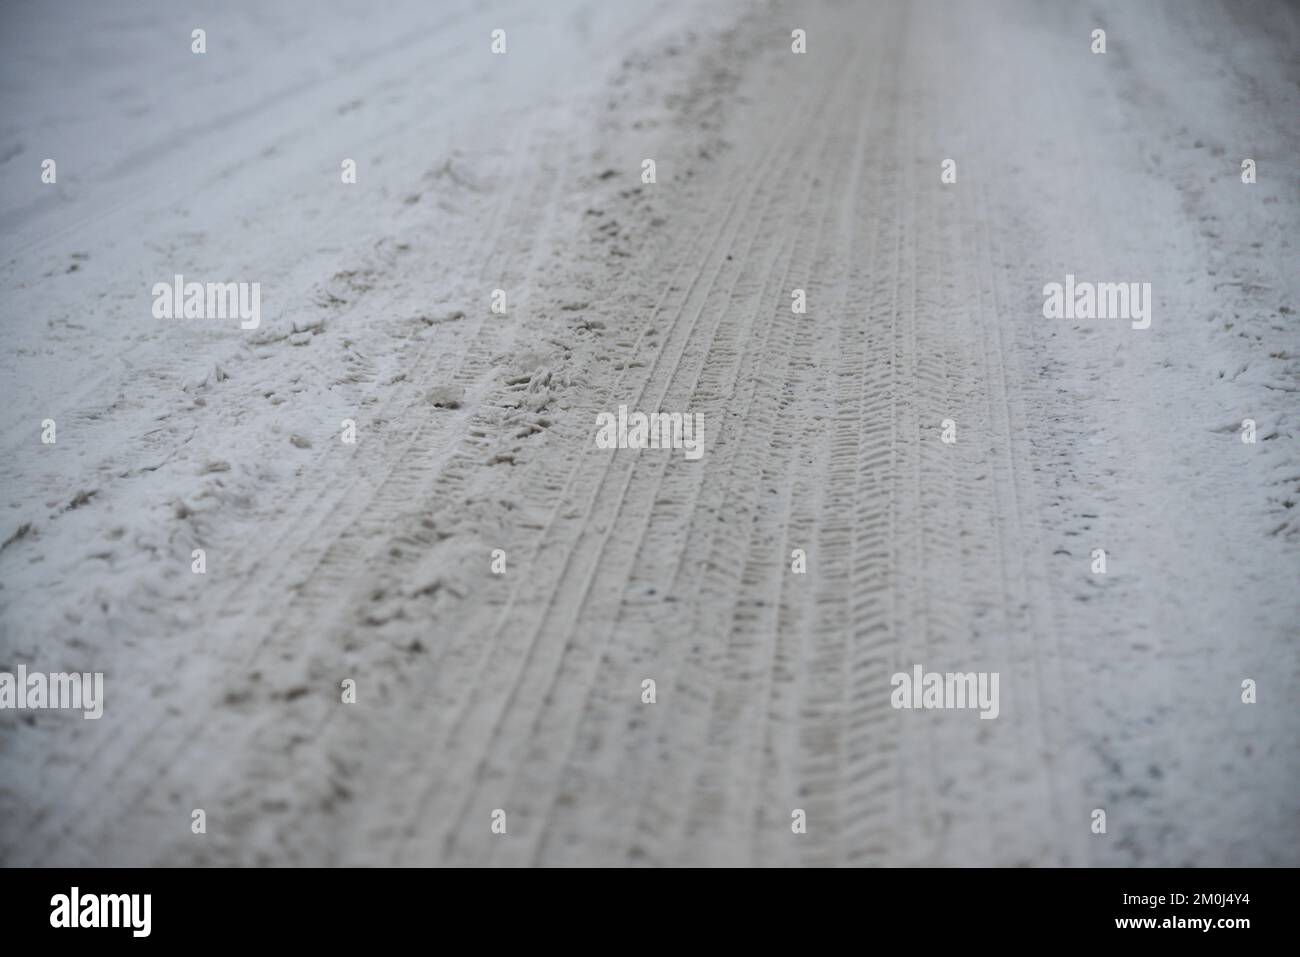 Wheel tracks on the winter road covered with snow. Stock Photo